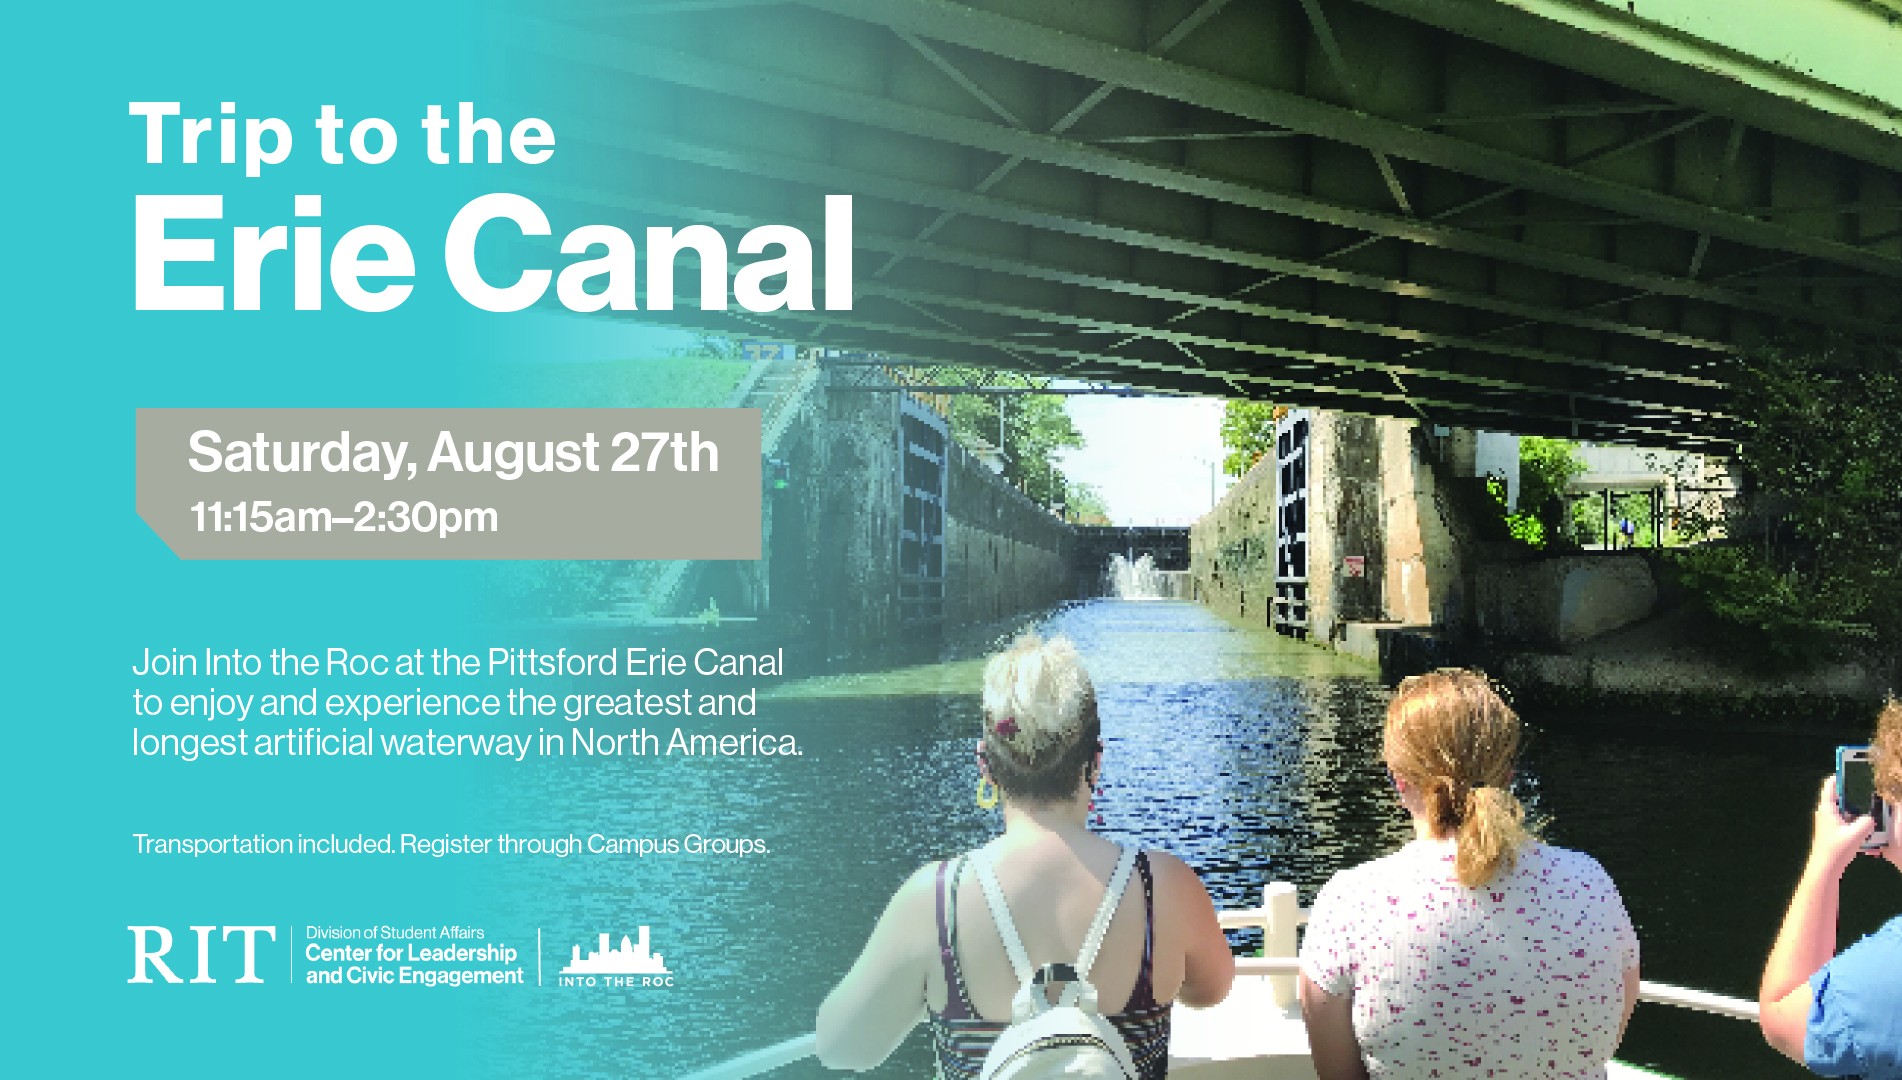 Join Into the Roc at the Pittsford Erie Canal to enjoy and experience the greatest artificial waterway in North America. This event takes place on August 27 from 11:15am-2:30pm.